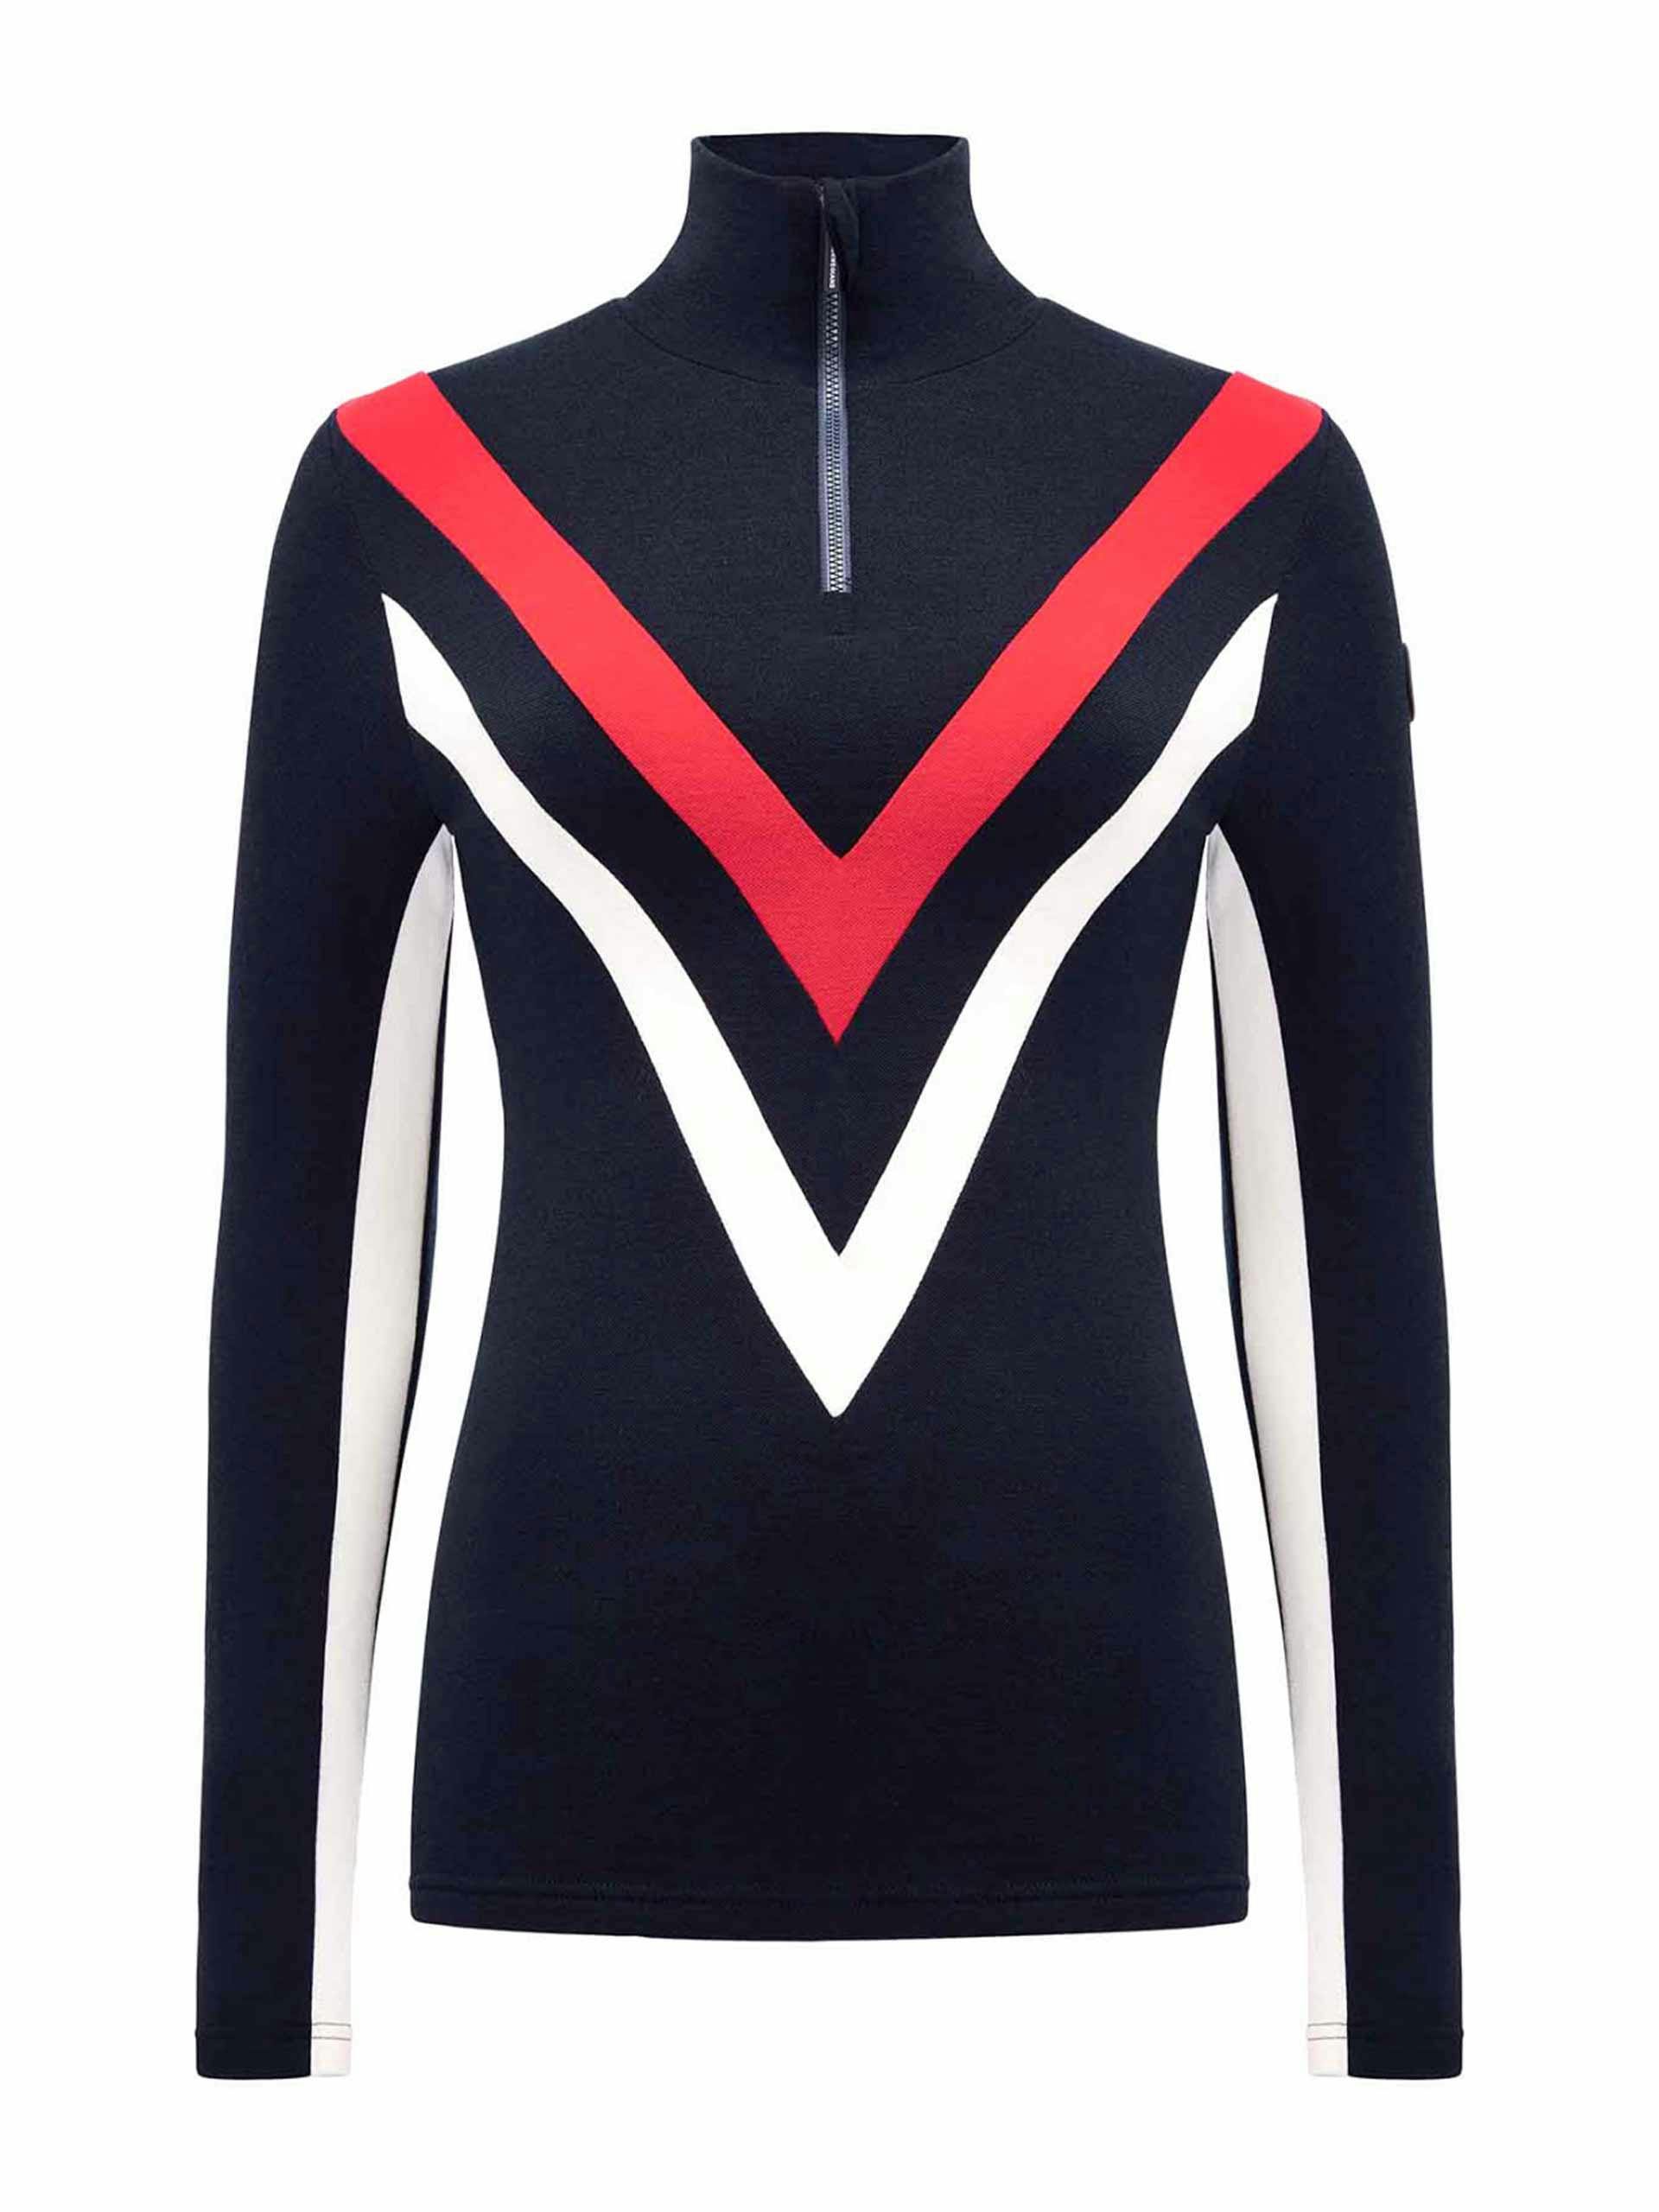 Navy, white and red sweater